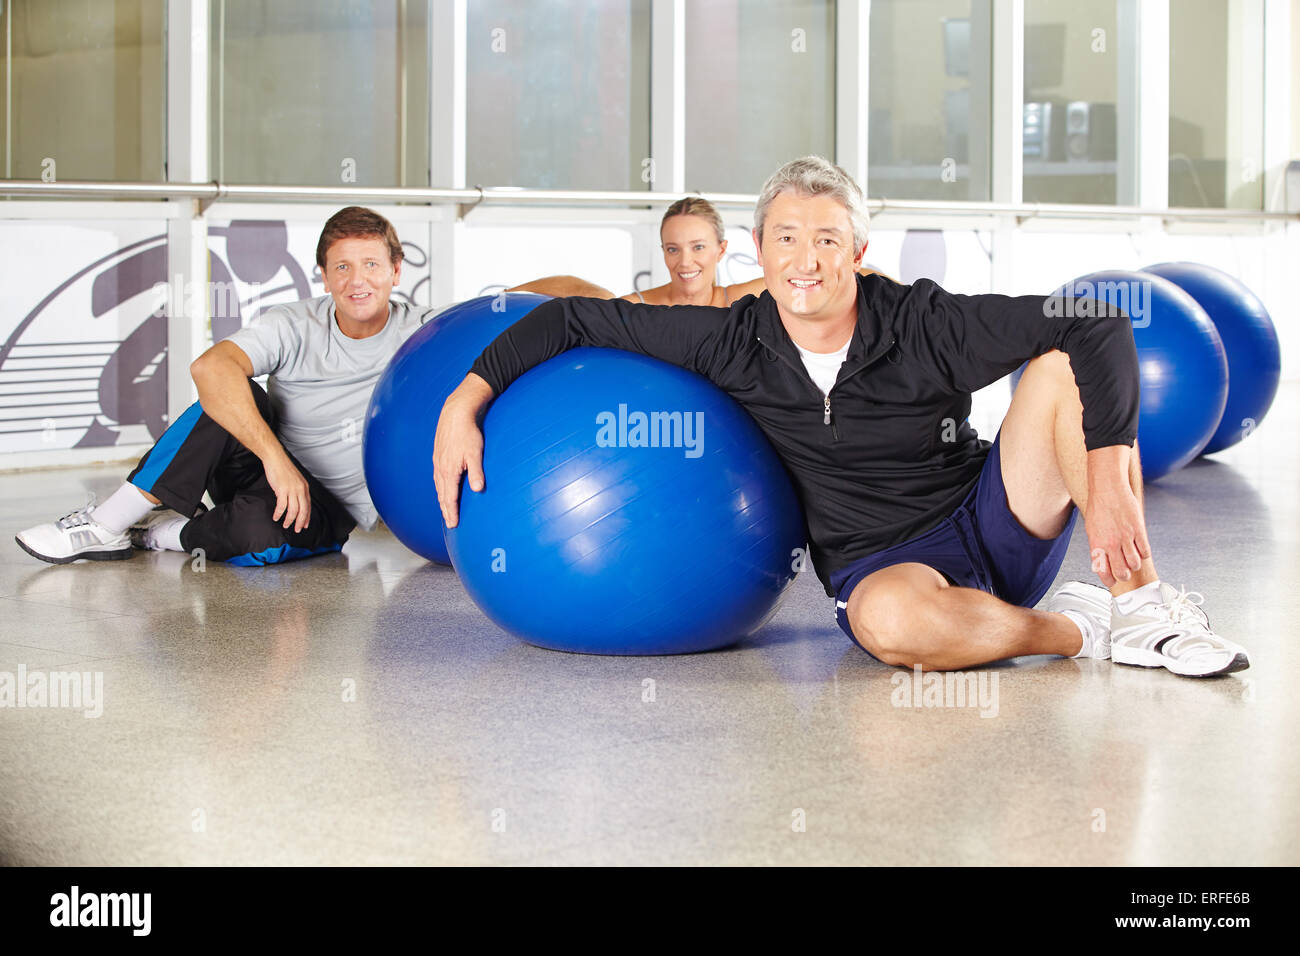 Man sitting in group of senior people with gym ball in a fitness center Stock Photo